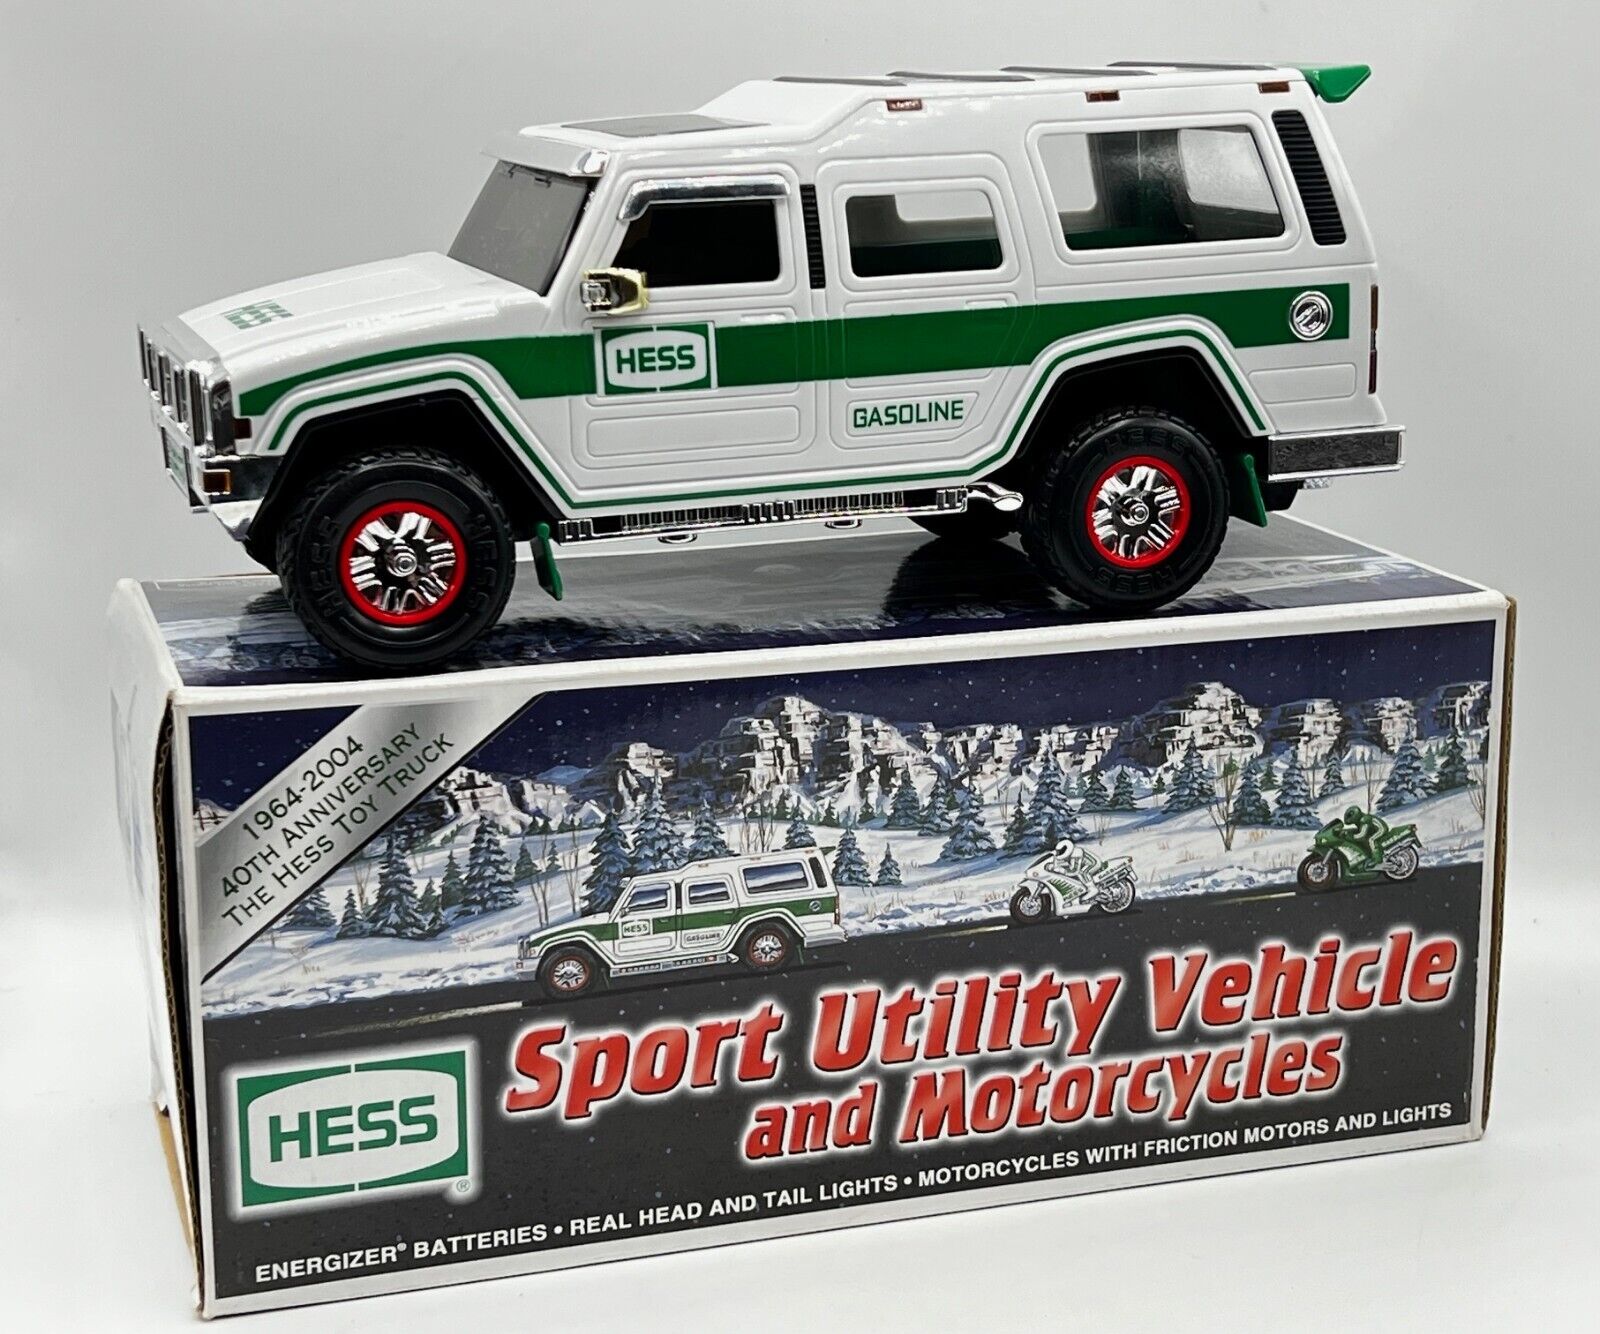 2004 HESS Truck Sport Utility Vehicle And Motorcycles 40th Anniversary Edition 